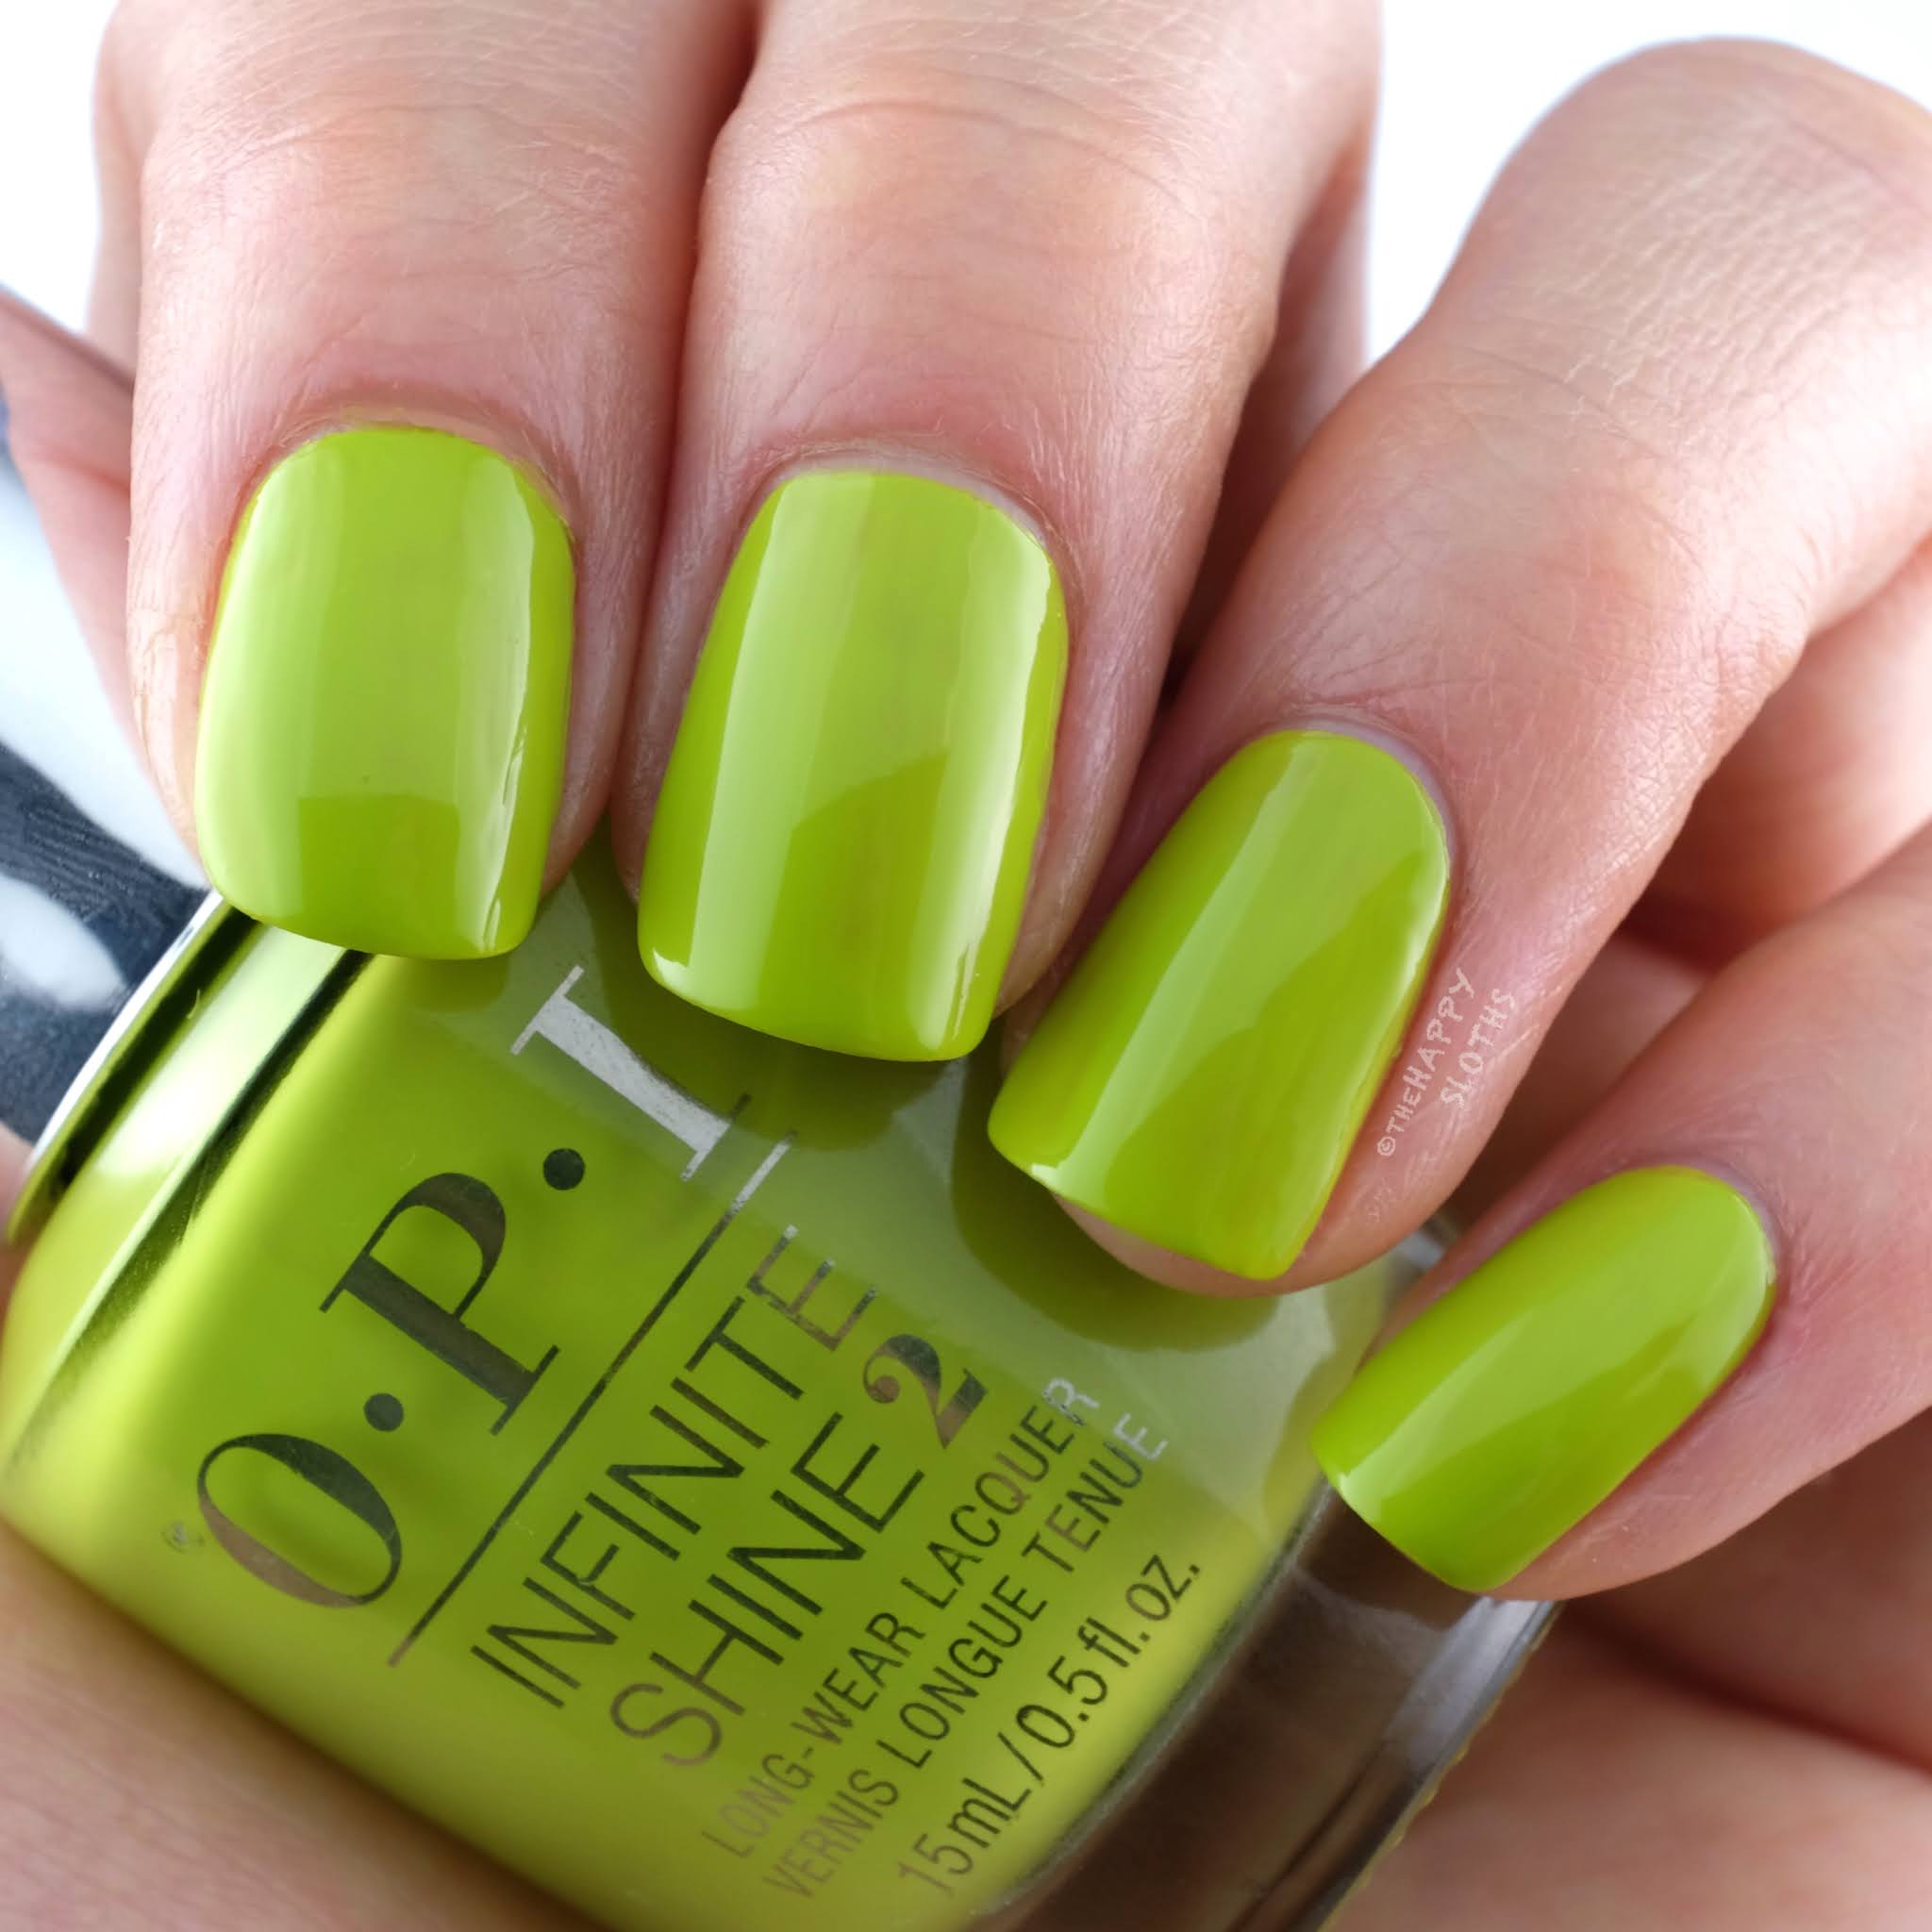 OPI Summer 2021 Malibu Collection | Pear-adise Cove: Review and Swatches